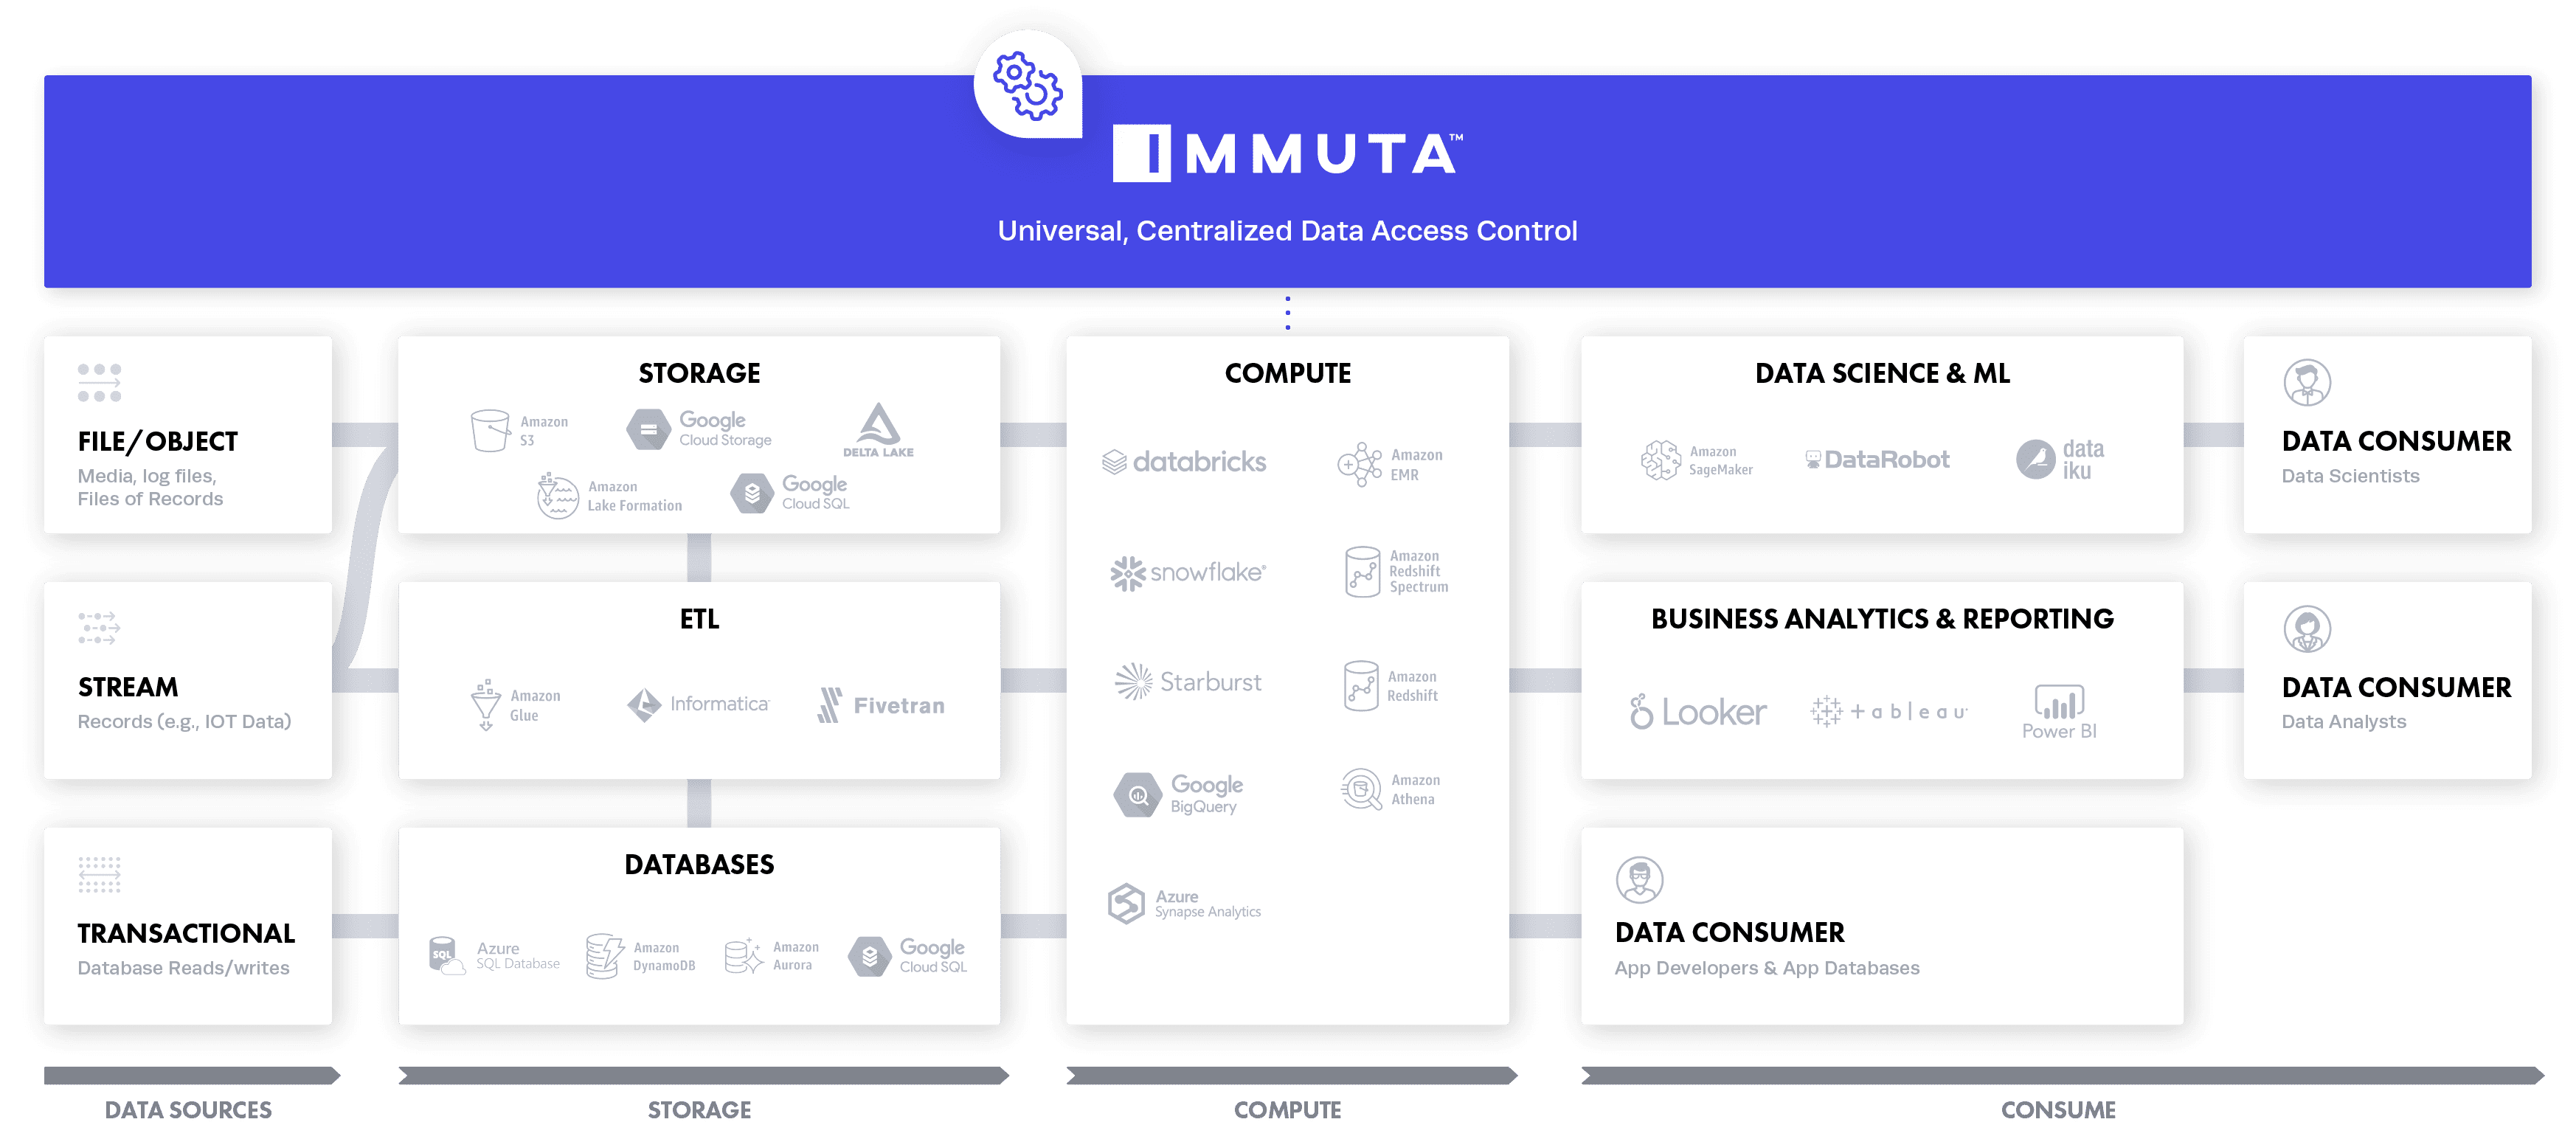 https://www.immuta.com/wp-content/uploads/2021/05/With-Immuta-Centralized-Control-Plane-for-Consistent-Policy-Enforcement@3x-1.png